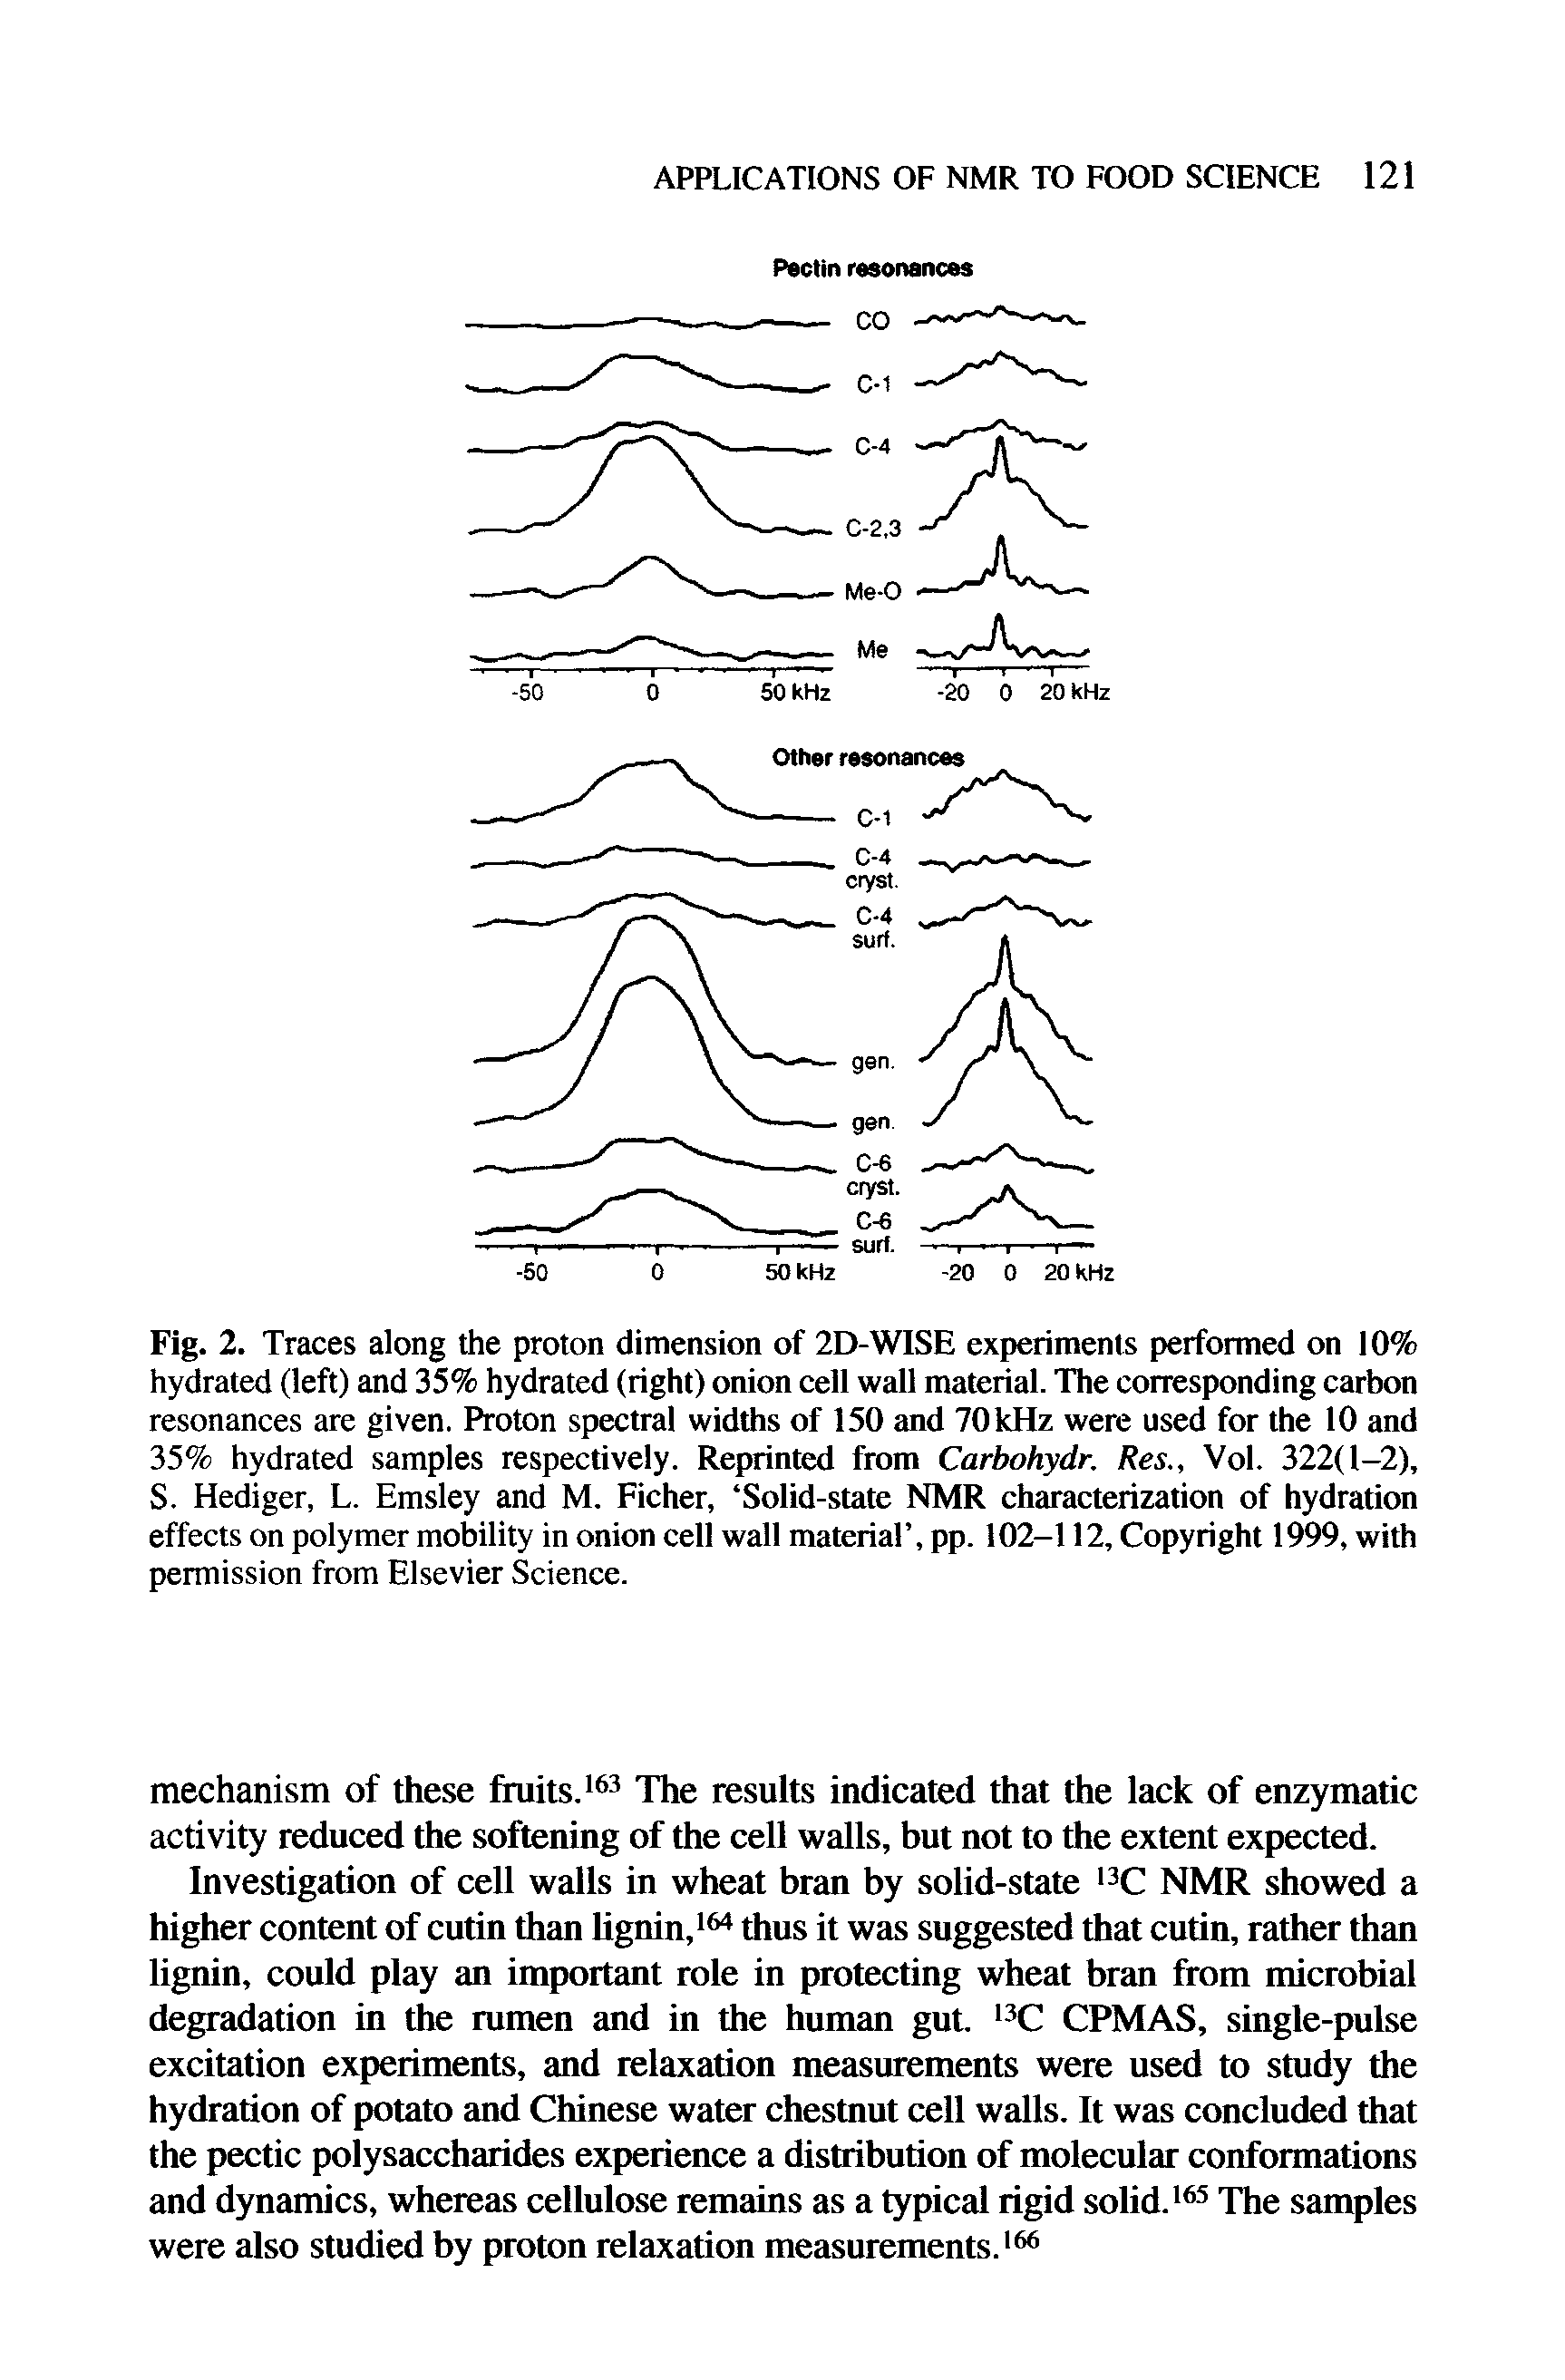 Fig. 2. Traces along the proton dimension of 2D-WISE experiments performed on 10% hydrated (left) and 35% hydrated (right) onion cell wall material. The corresponding carbon resonances are given. Proton spectral widths of 150 and 70 kHz were used for the 10 and 35% hydrated samples respectively. Reprinted from Carbohydr. Res., Vol. 322(1-2), S. Hediger, L. Emsley and M. Ficher, Solid-state NMR characterization of hydration effects on polymer mobility in onion cell wall material , pp. 102-112, Copyright 1999, with permission from Elsevier Science.